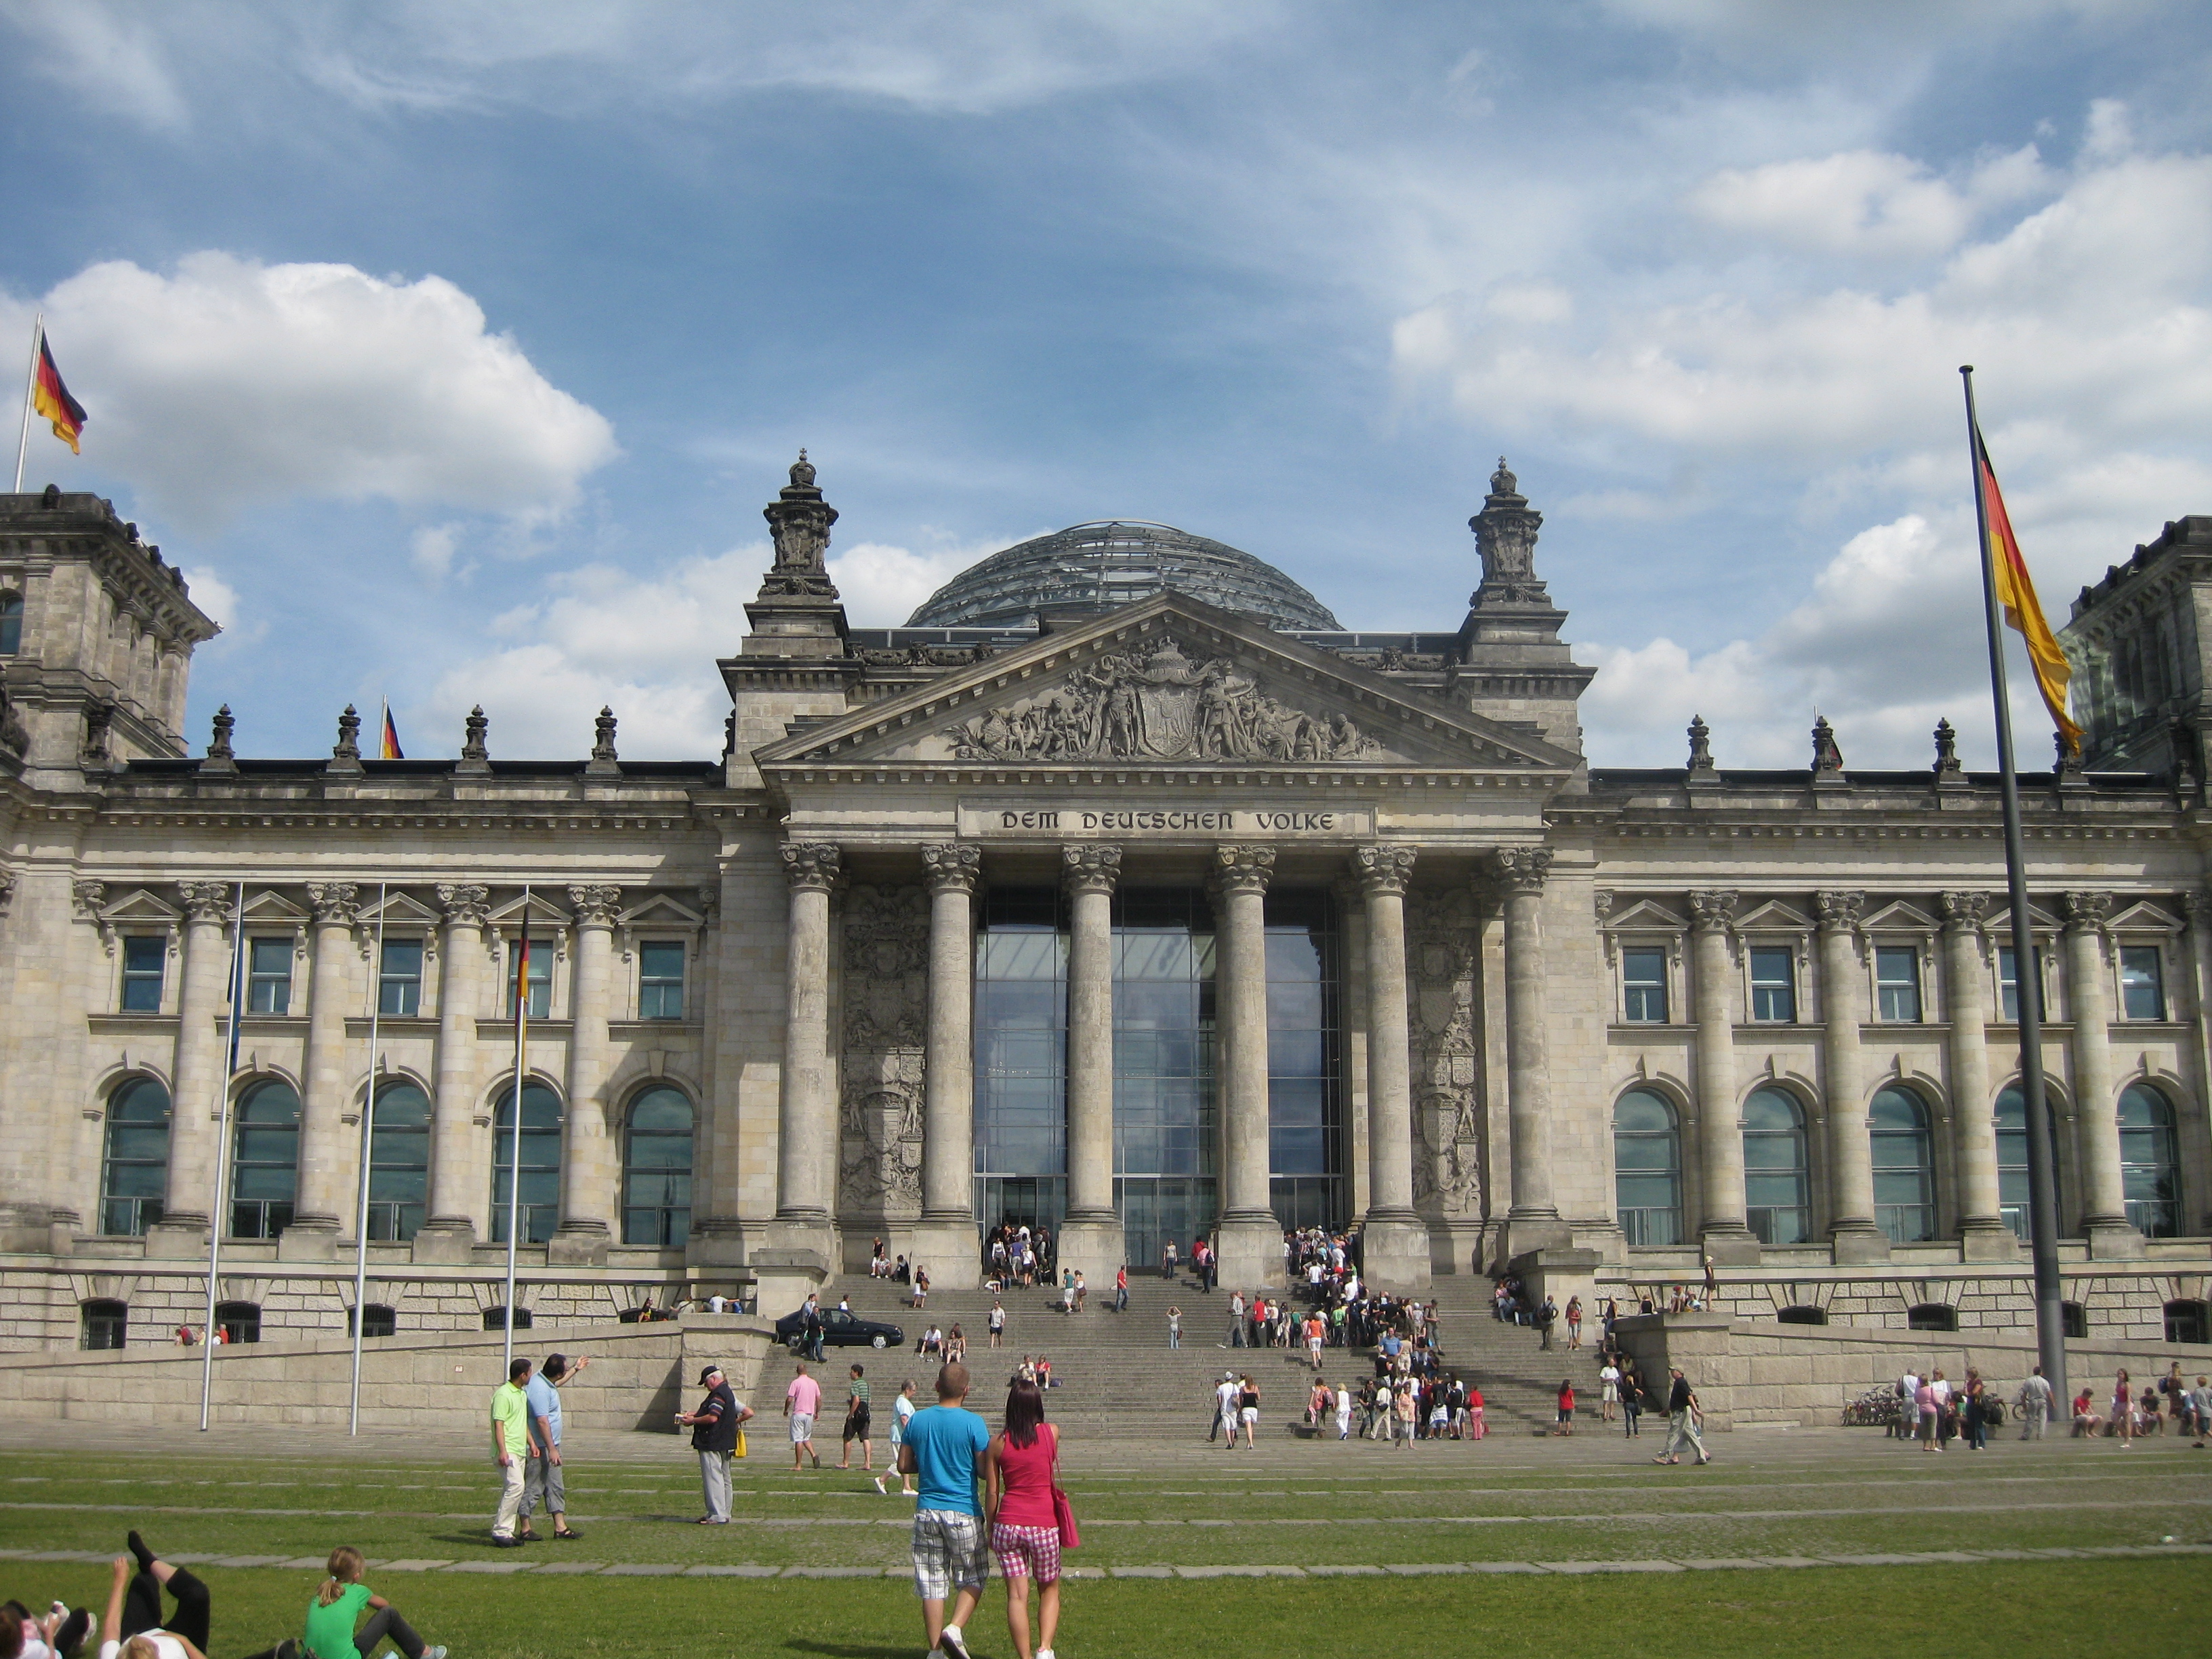 Reichstag building, home to the German Parliament